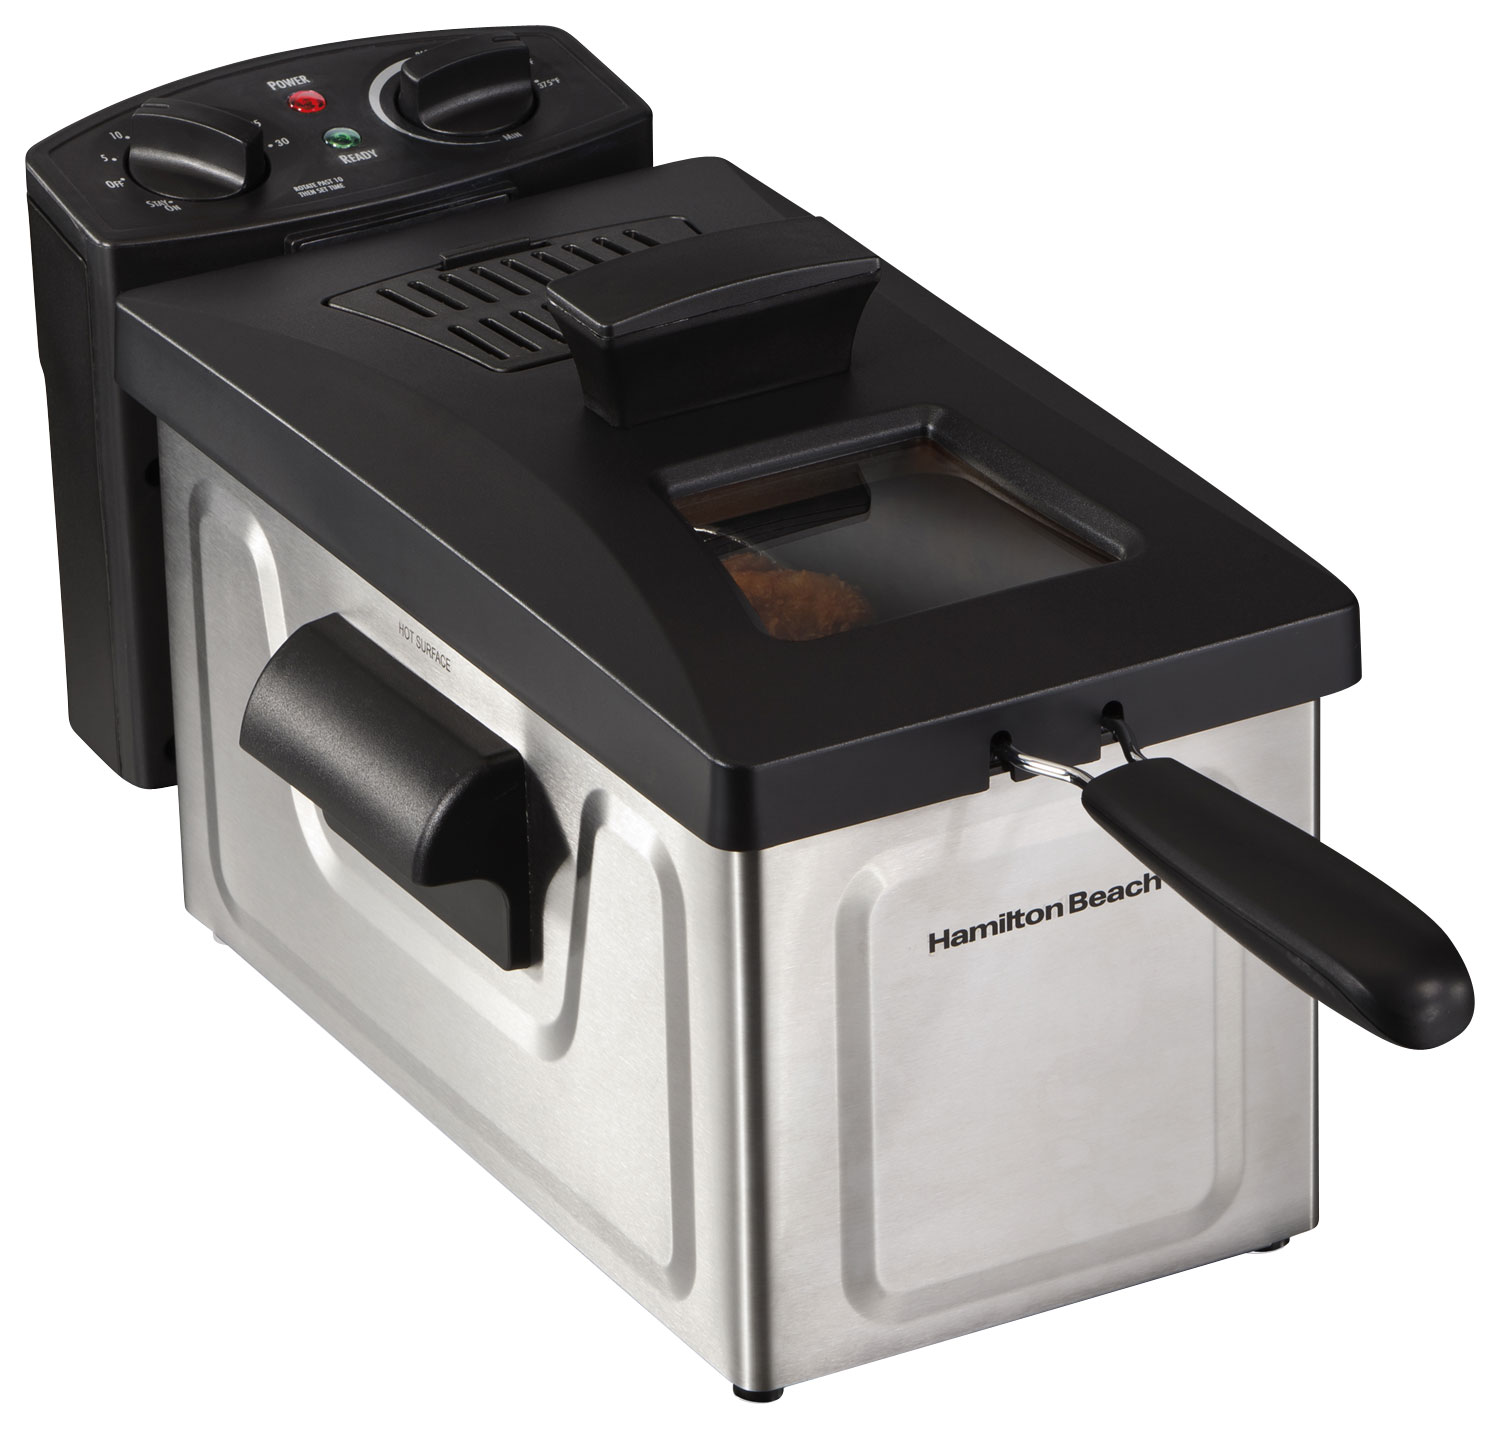 Hamilton Beach 8 Cup Professional Style Deep Fryer STAINLESS STEEL 35210 -  Best Buy